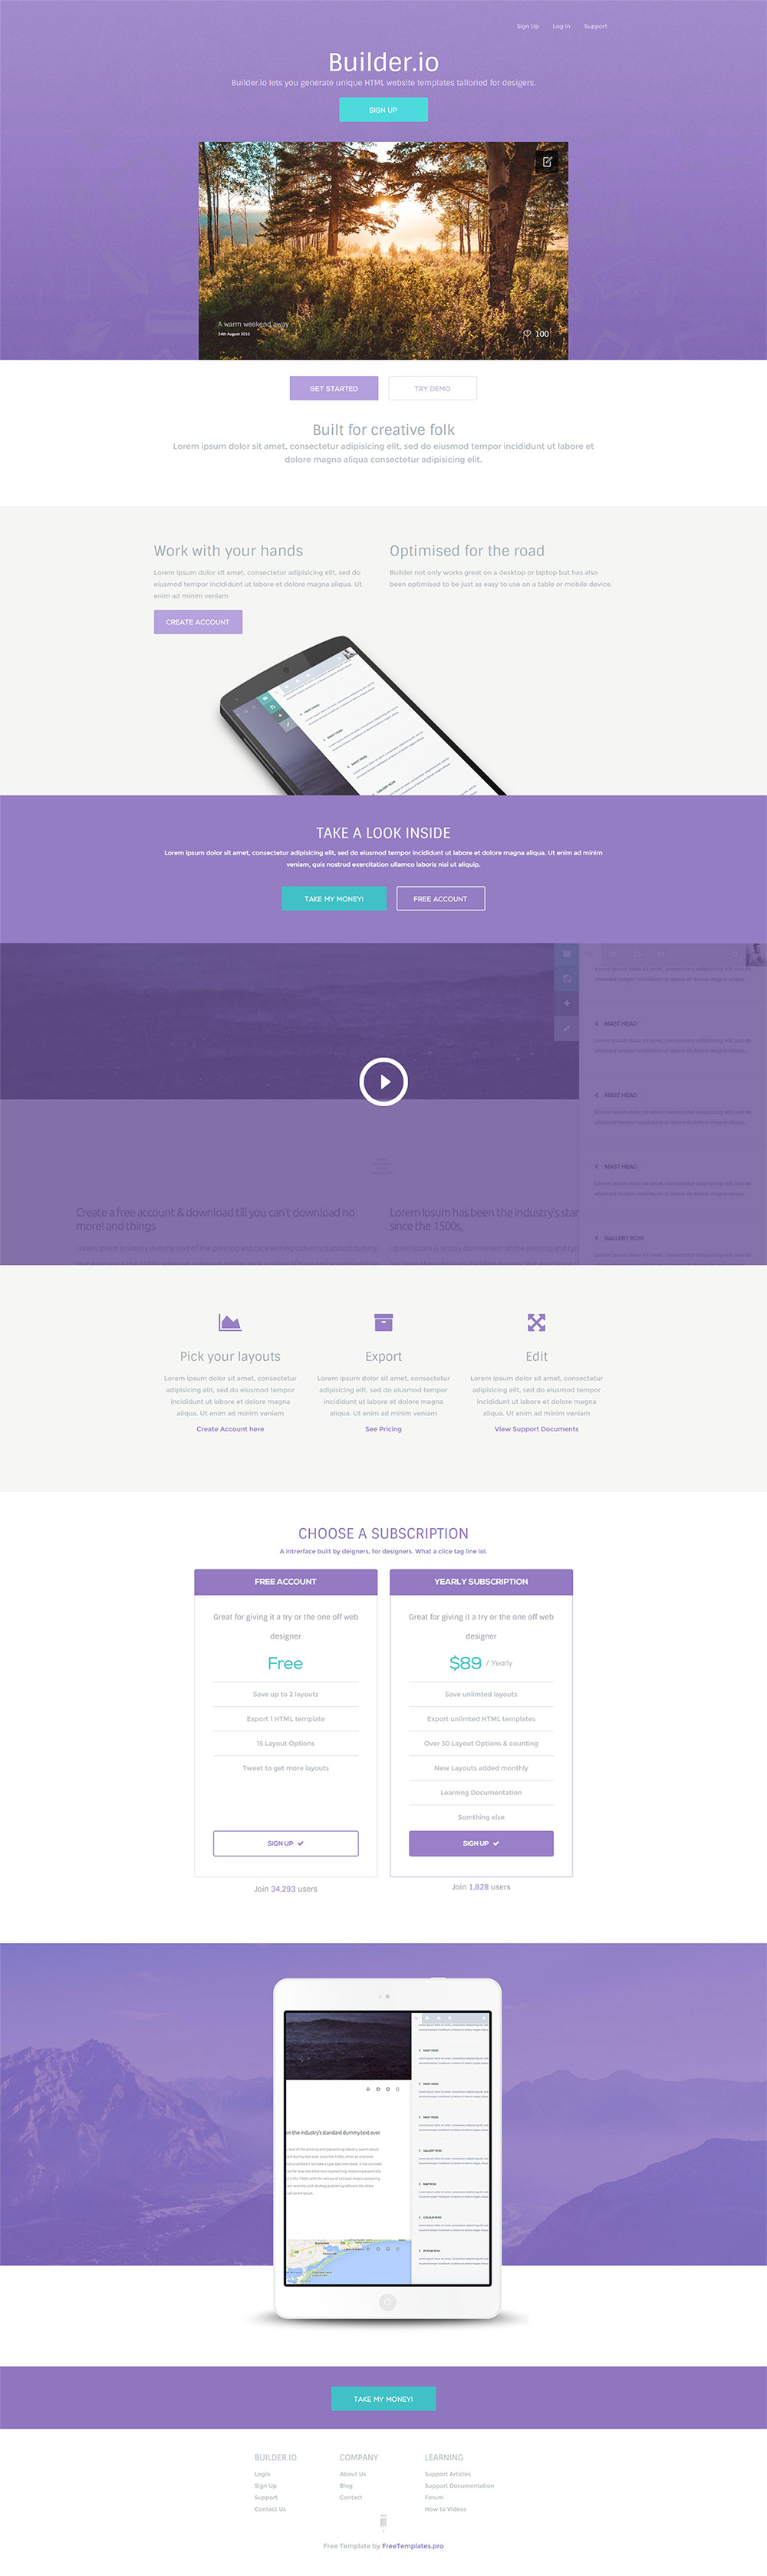 BUILDER A Free Vibrant Web App HTML Template Free HTML5 Templates